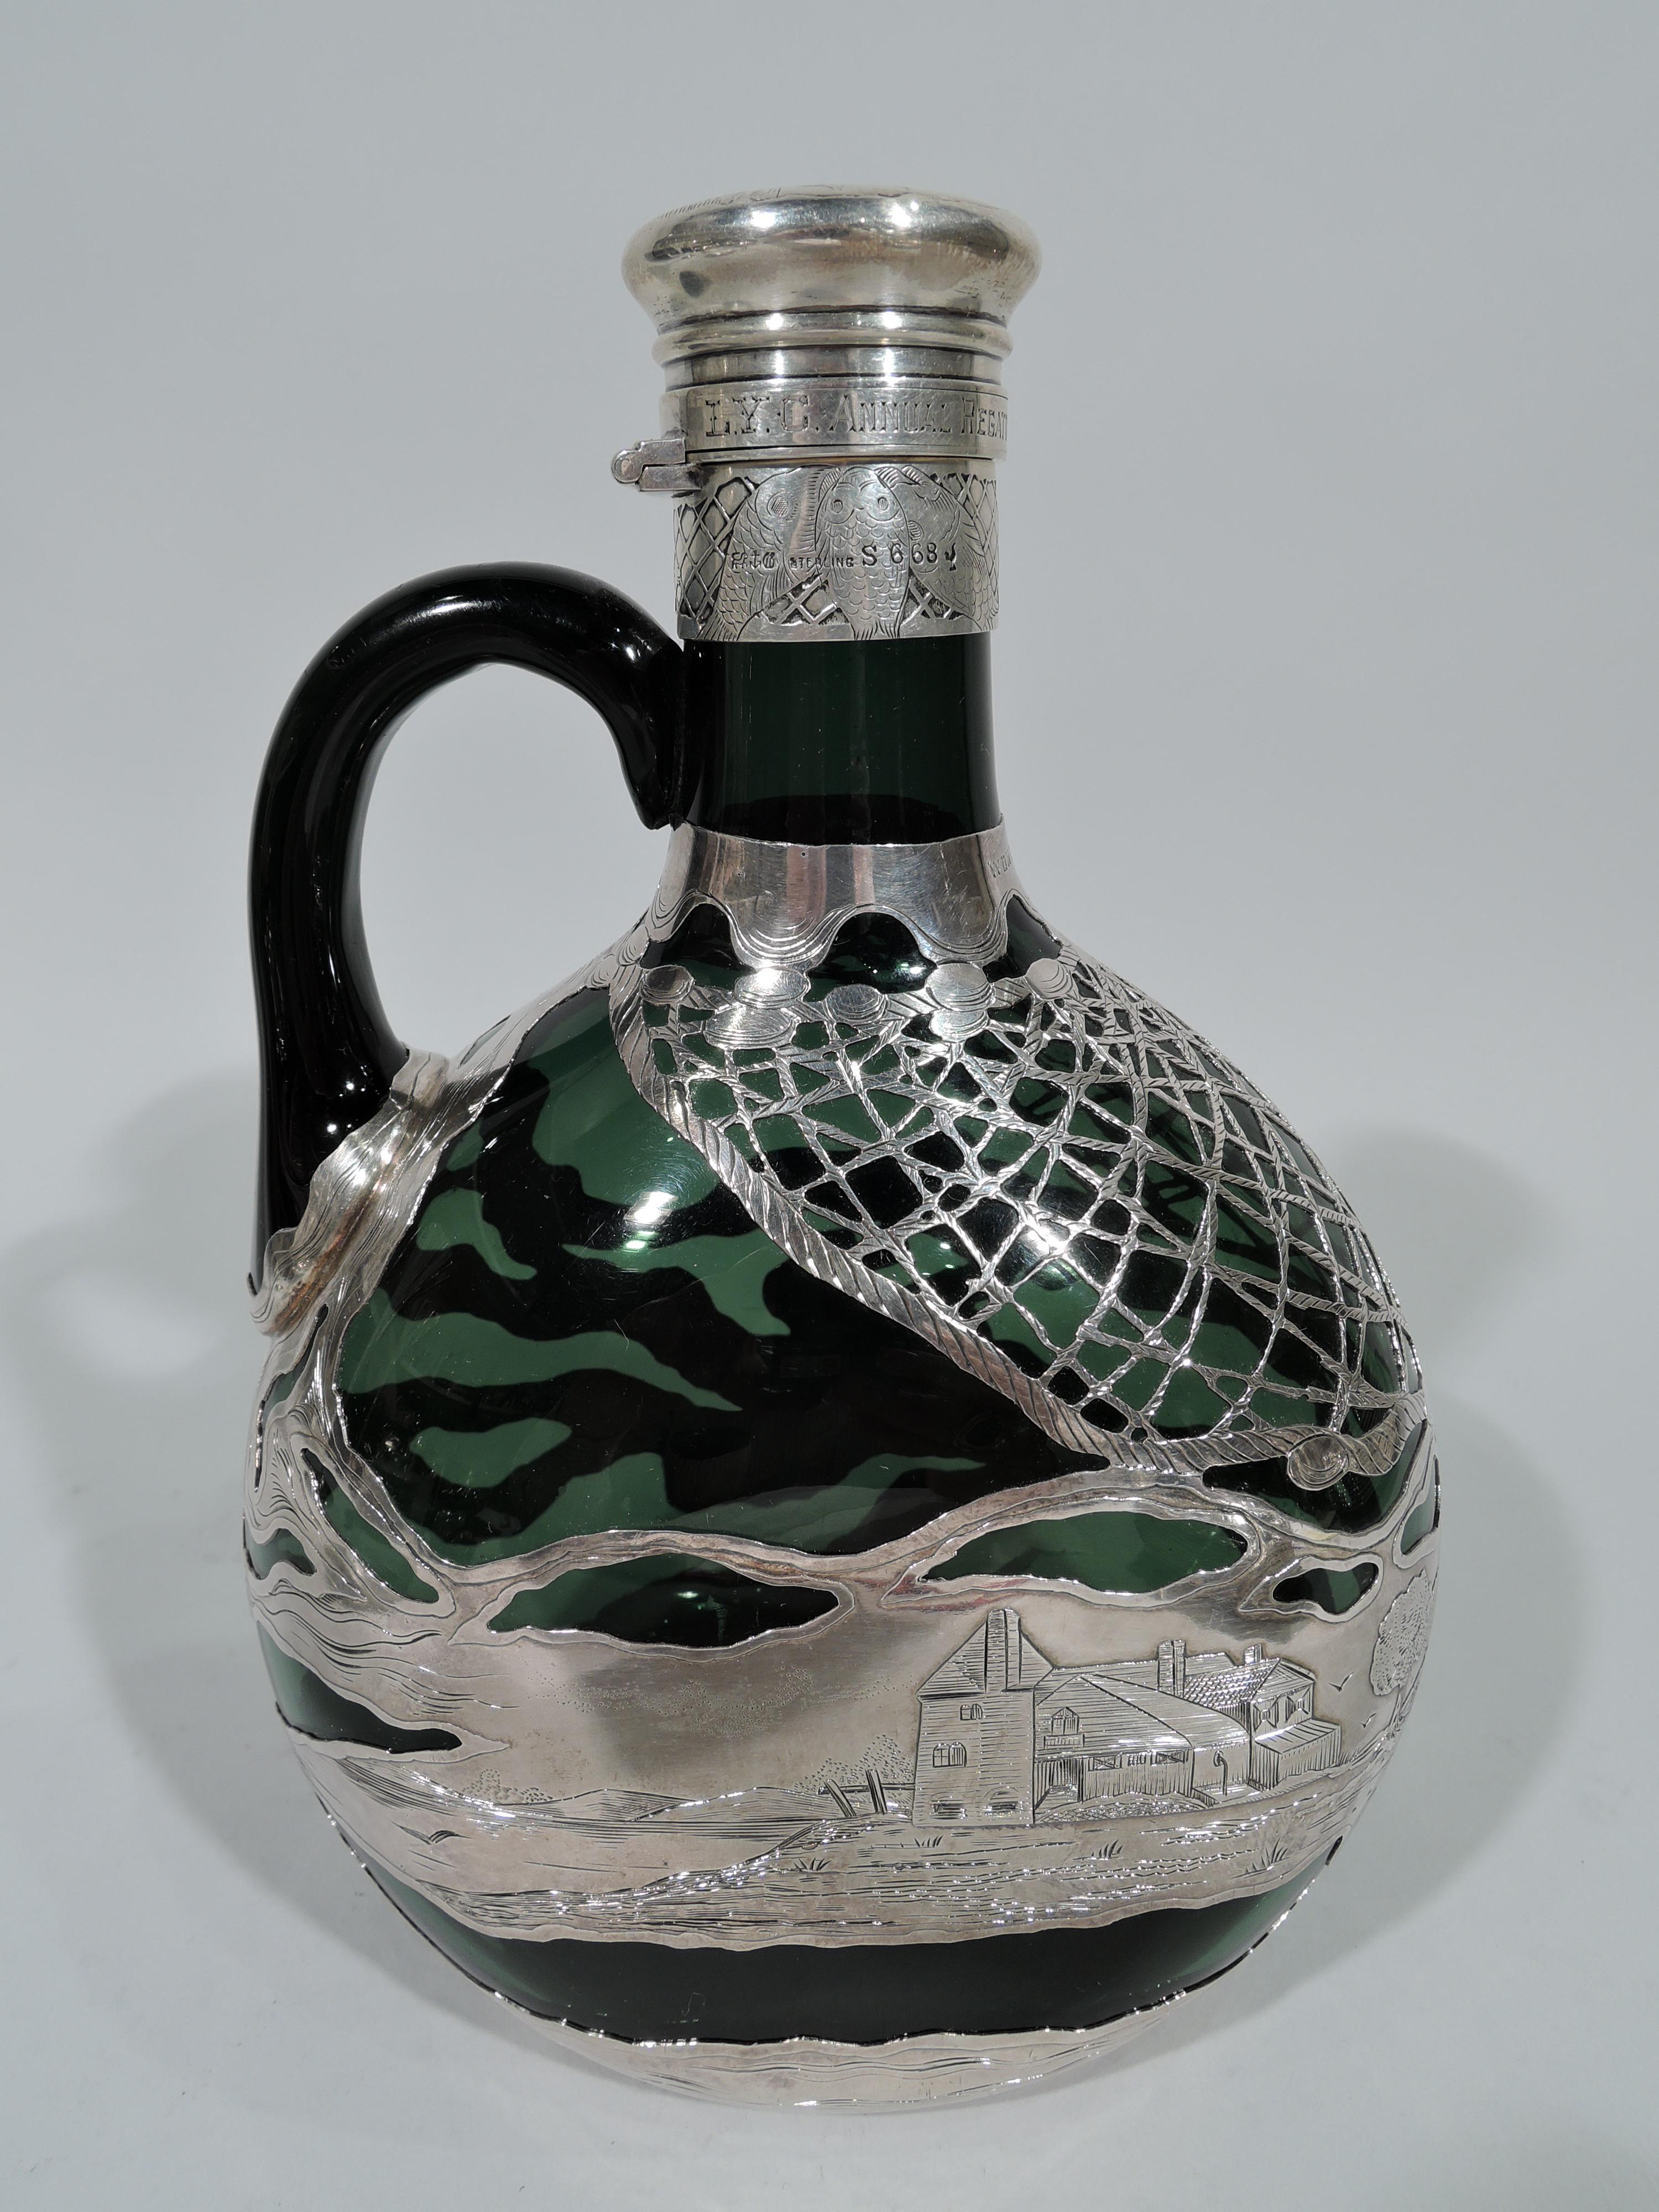 Art Nouveau emerald glass decanter with engraved and acid-etched pictorial silver overlay. Made by Gorham in Providence in 1890. Round and flat body with cylindrical neck and scroll handle mounted to neck and body. Overlay depicts landscape with